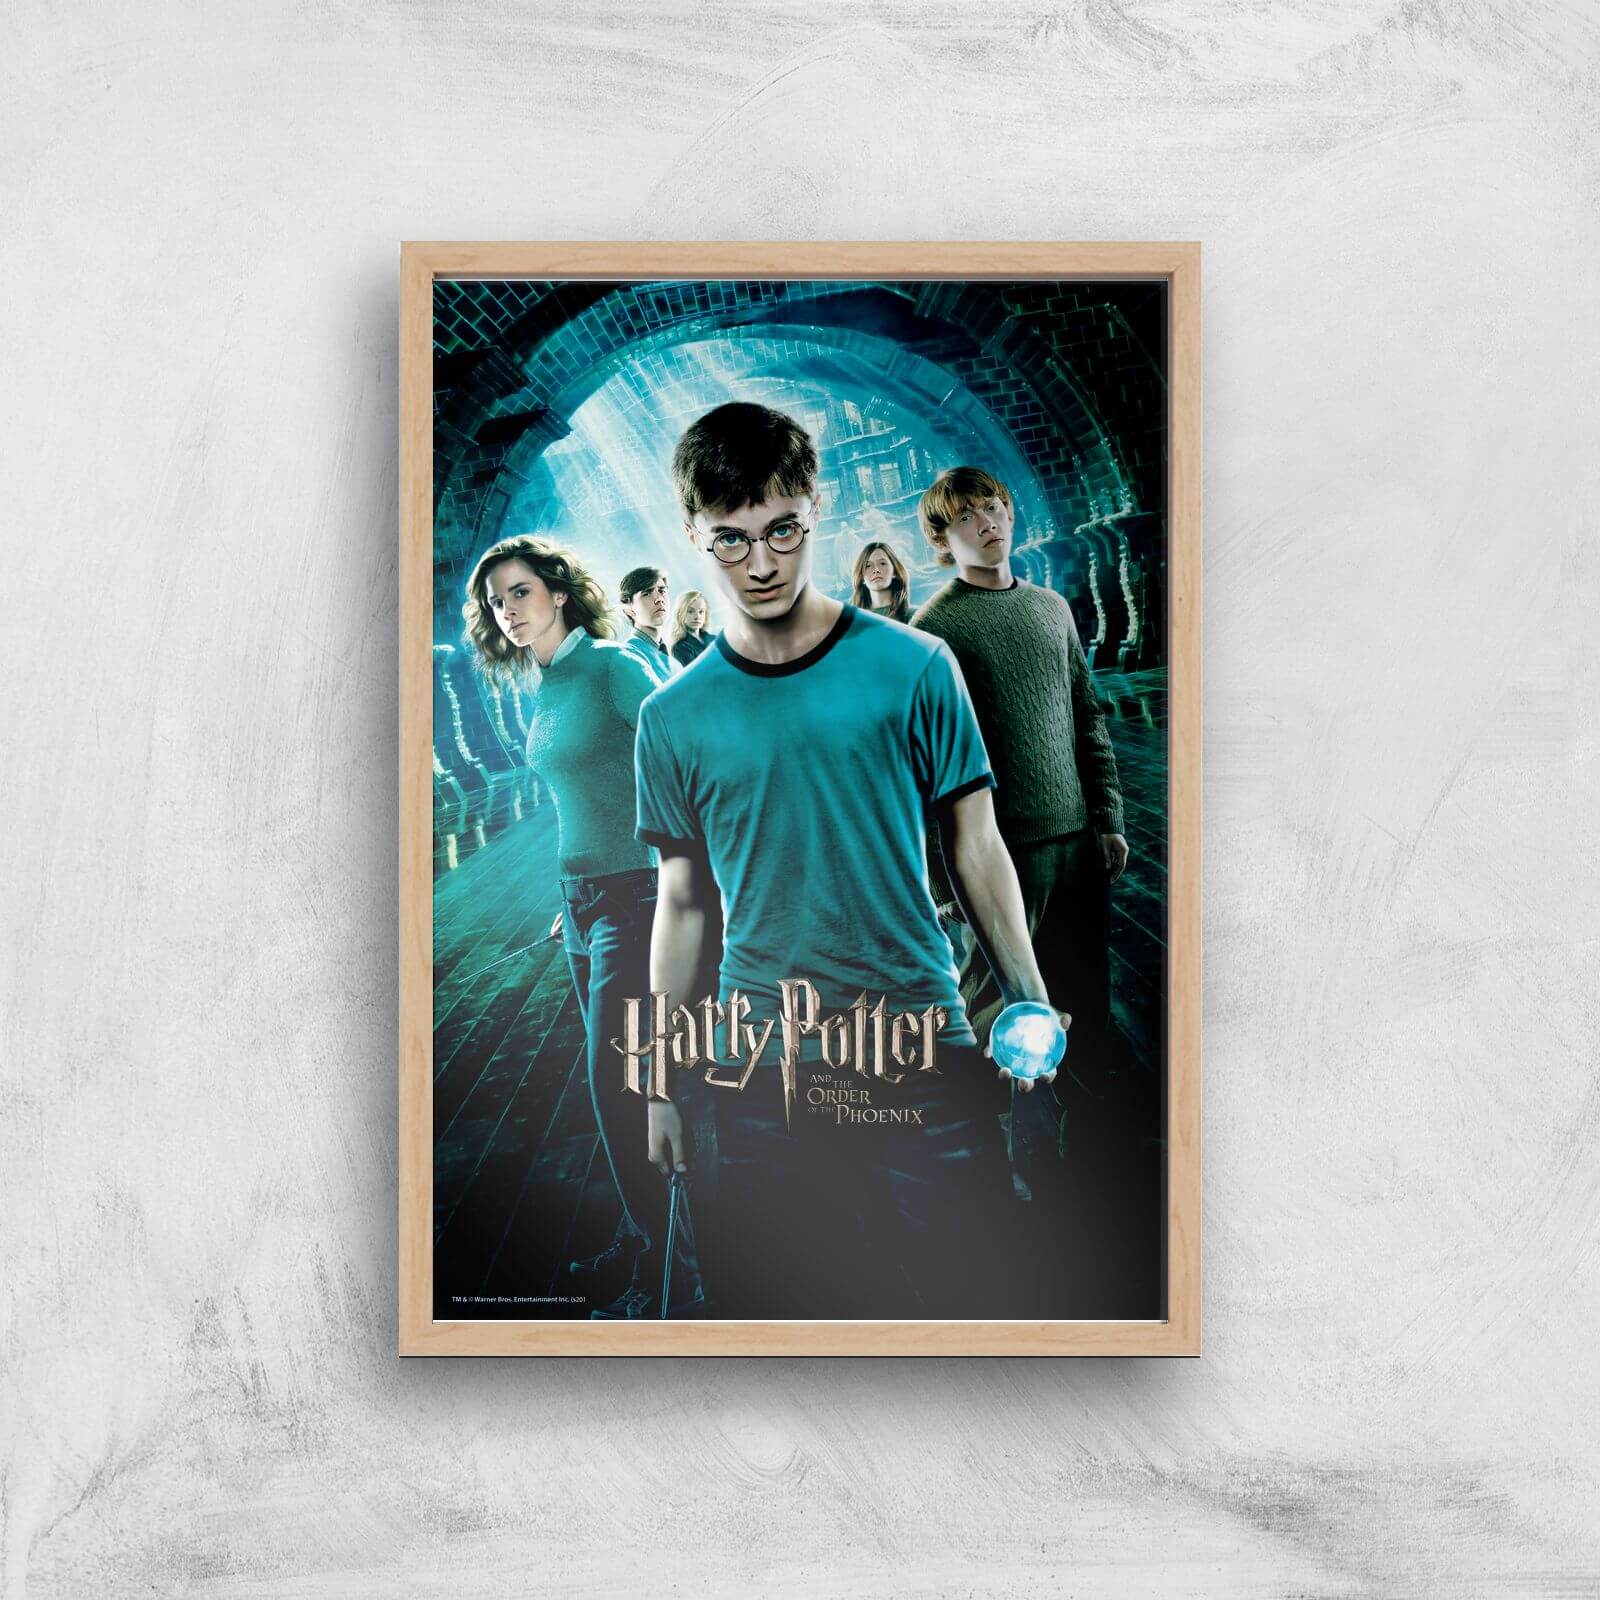 Harry Potter and the Order Of The Phoenix Giclee Art Print - A2 - Wooden Frame